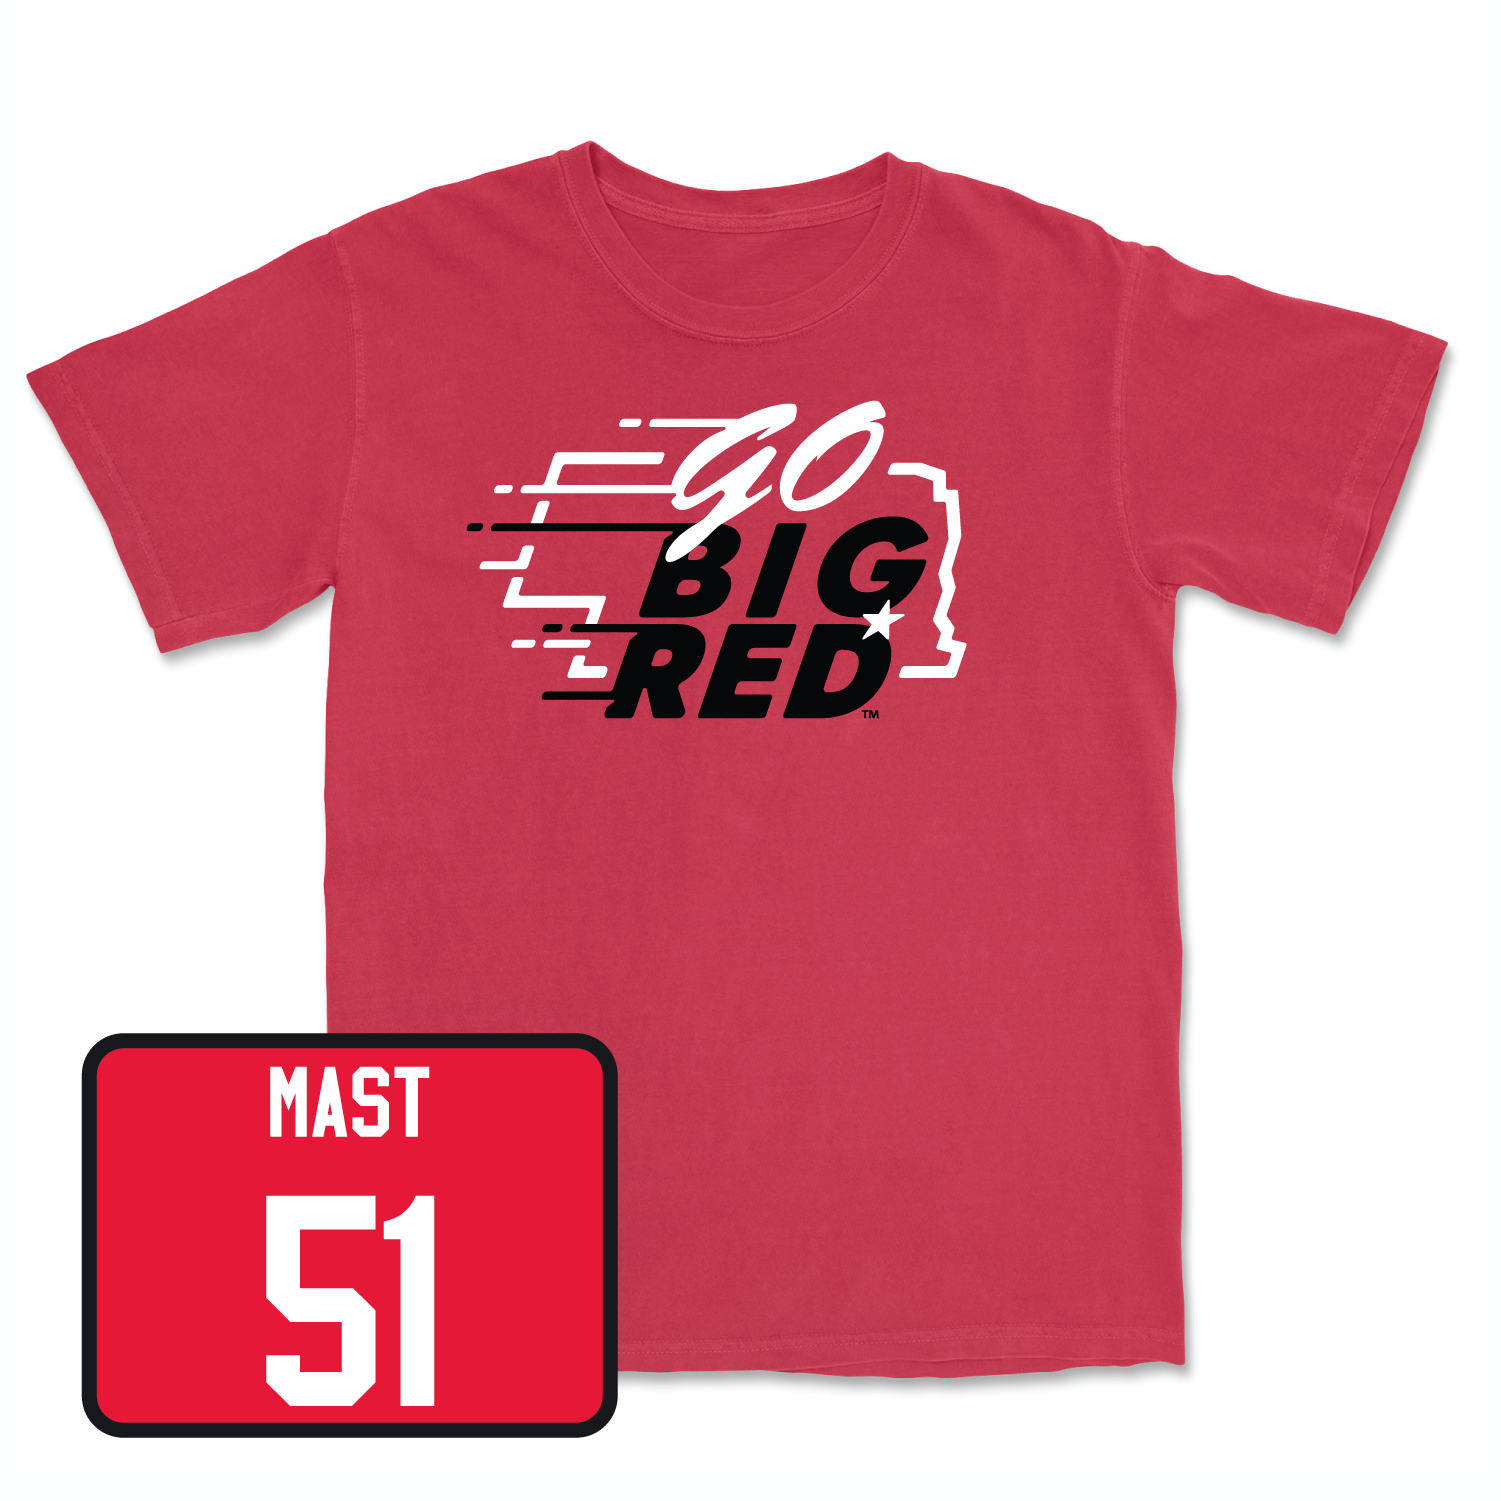 Red Men's Basketball GBR Tee Small / Rienk Mast | #51